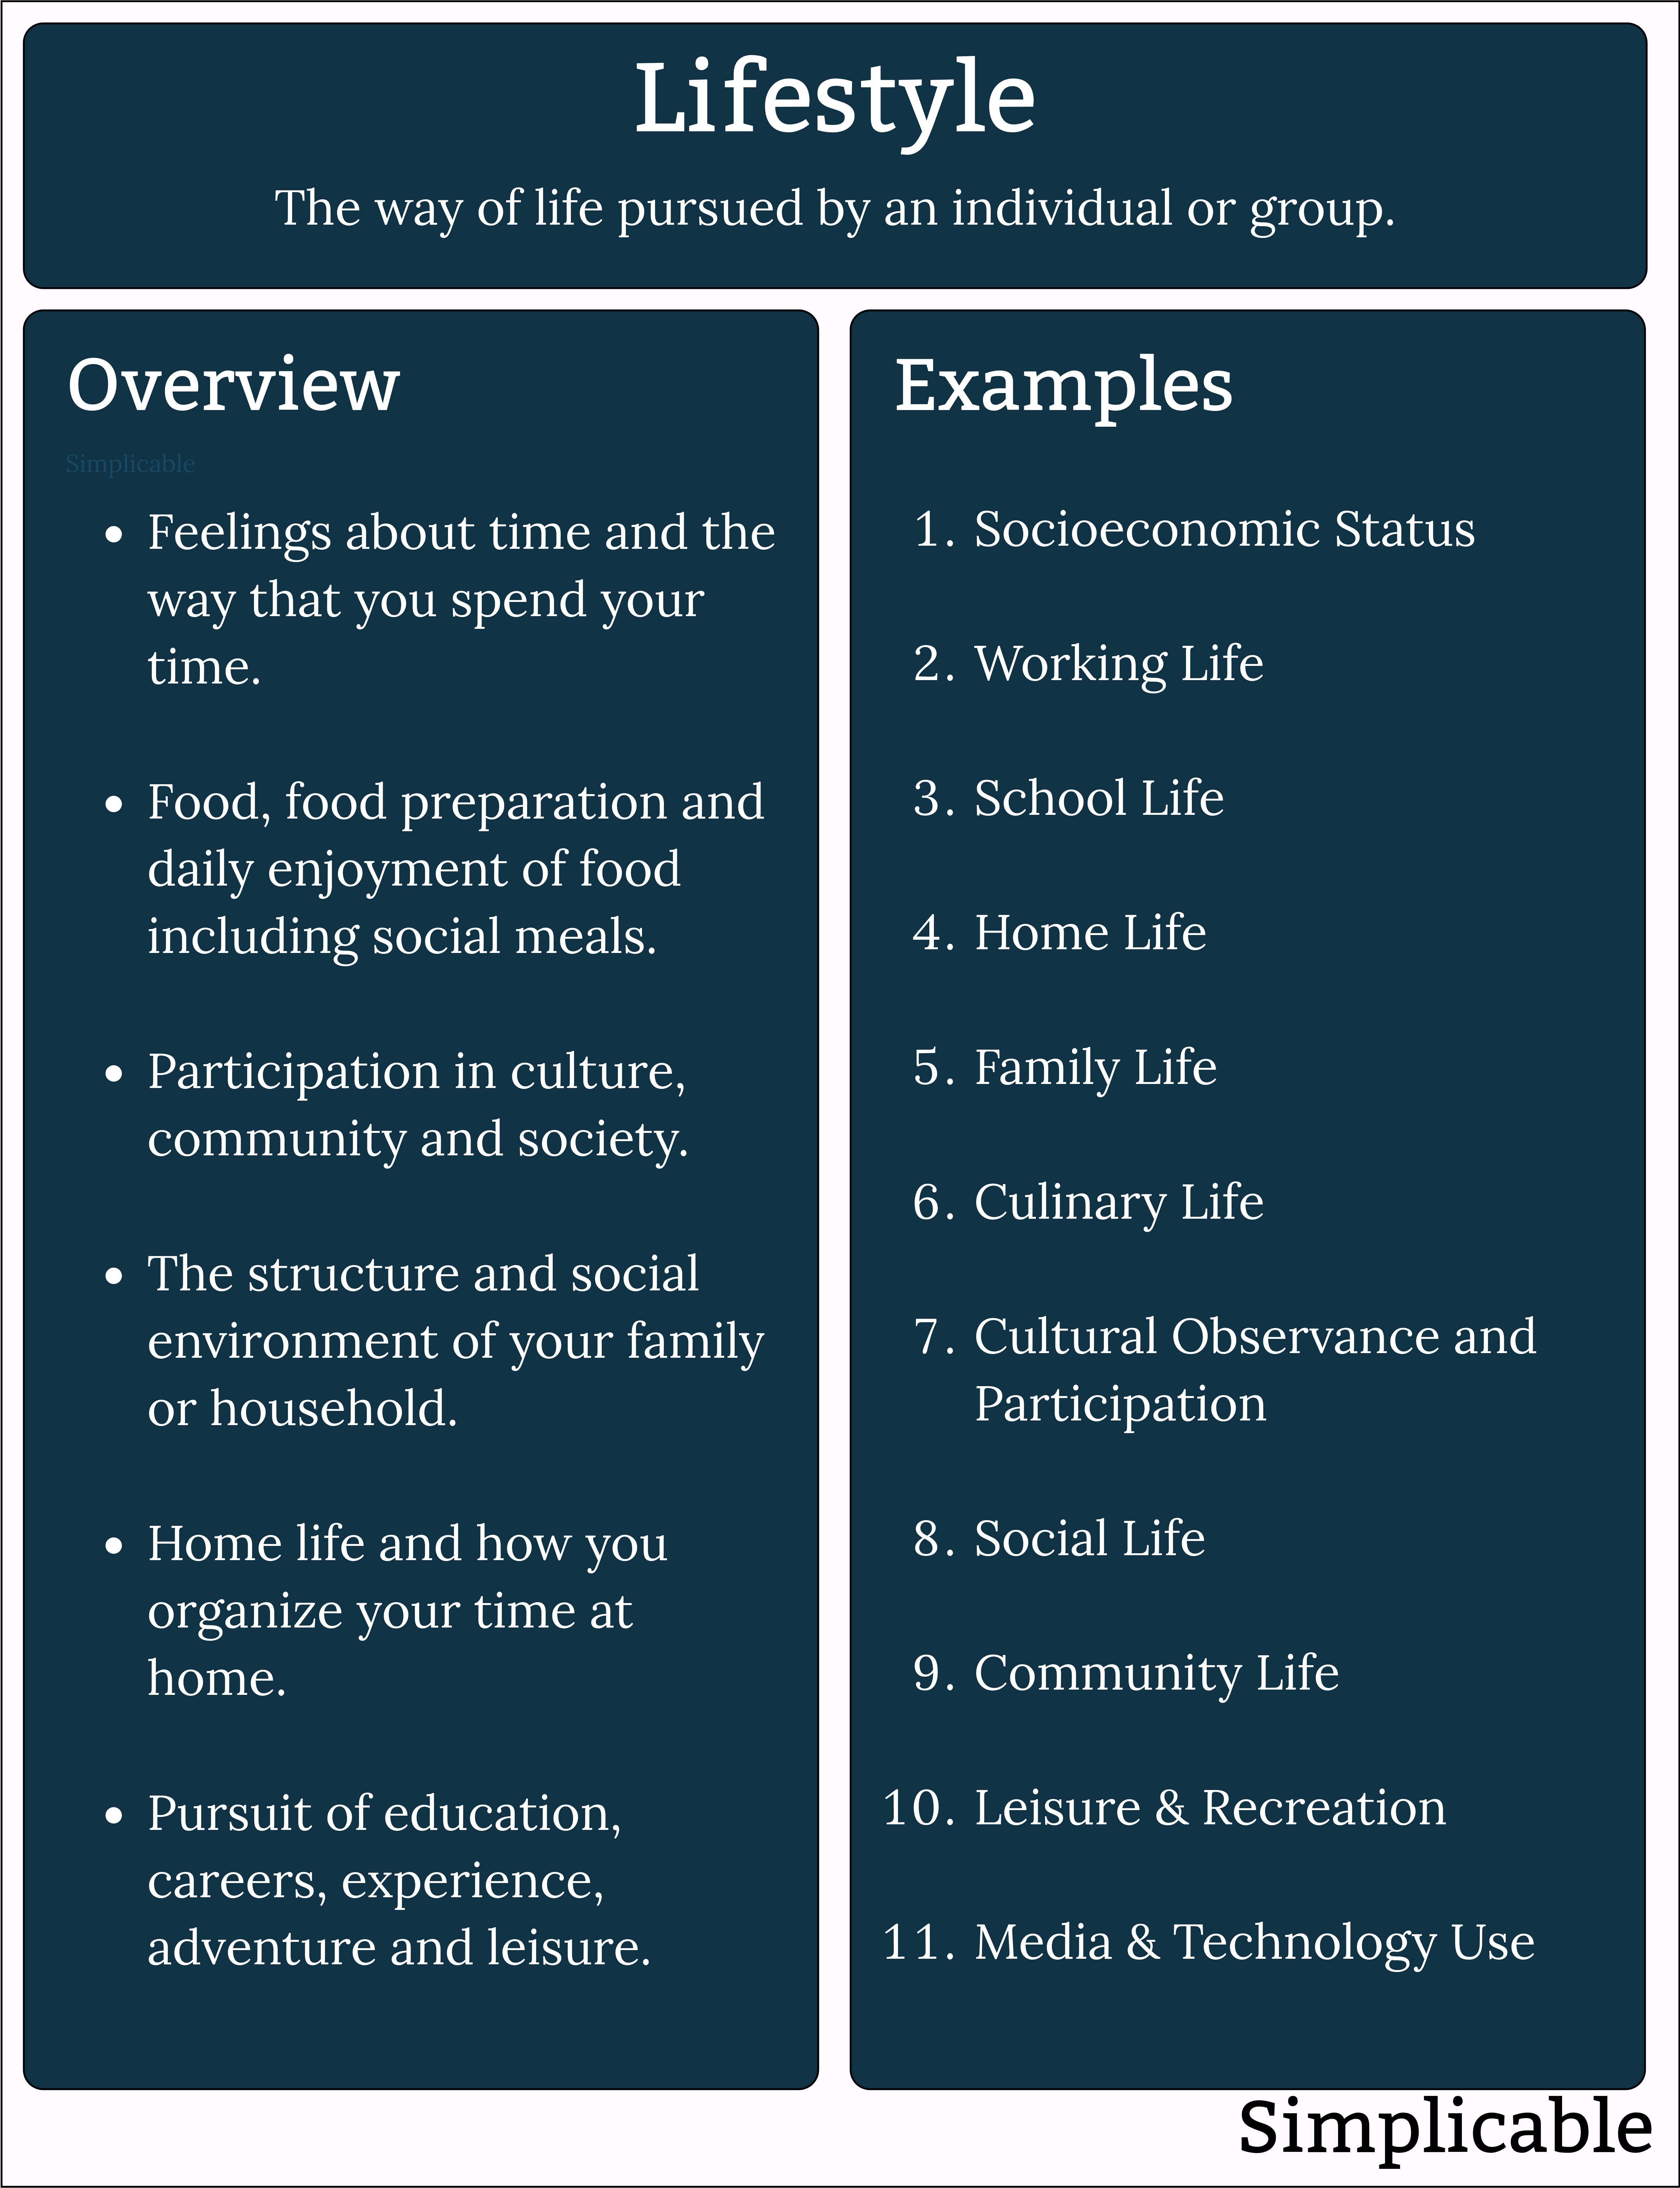 lifestyle summary and overview